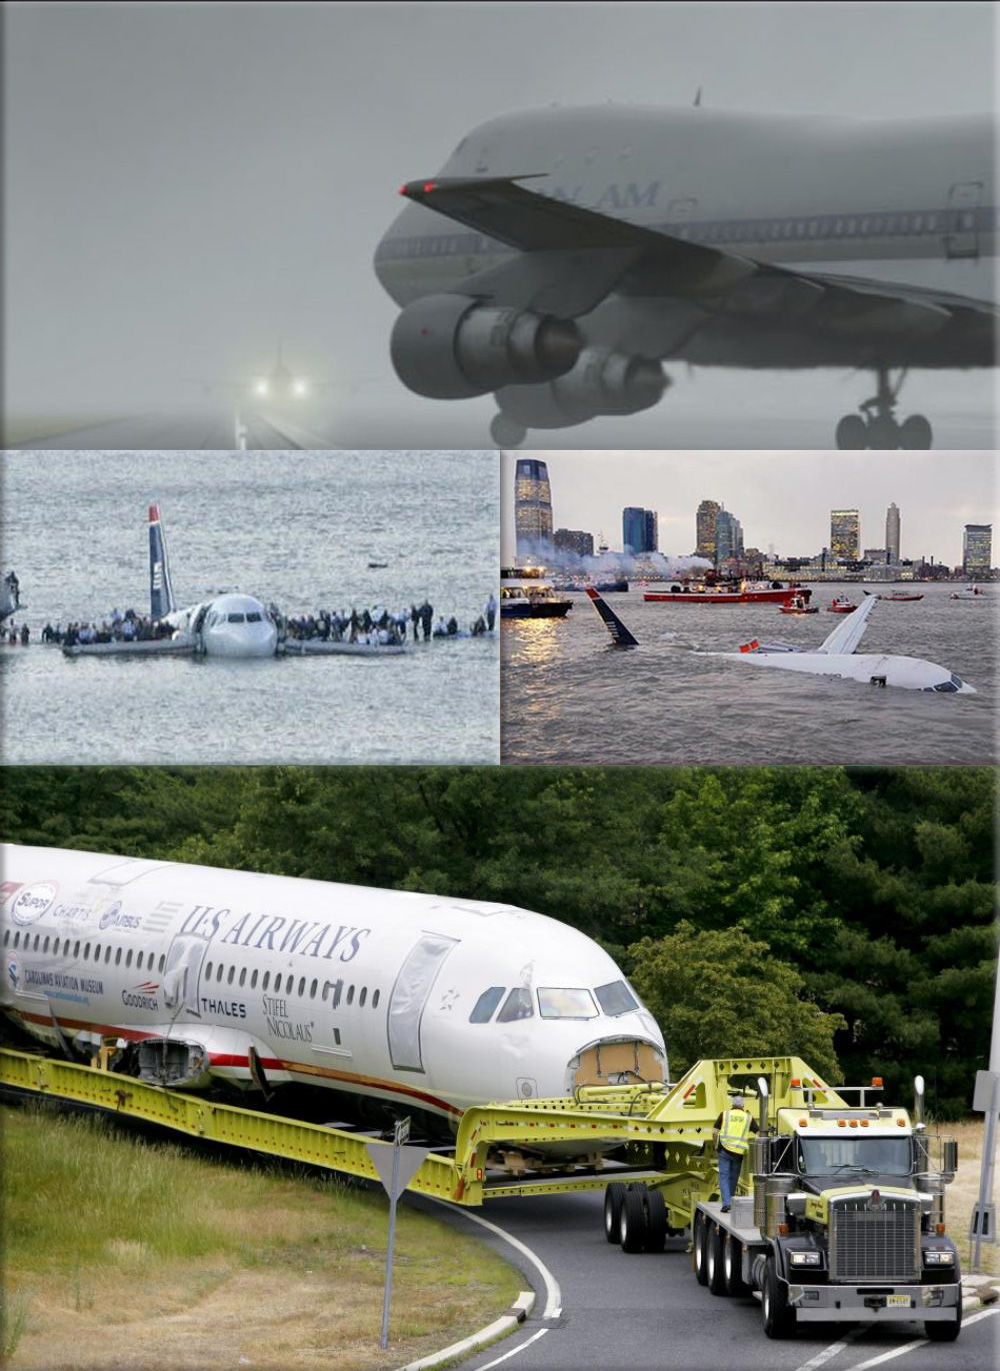 Airliners Crash: ● Pan AM 747 ● U.S. Airways flight 1549 also known as the 'Miracle on the Hudson' navigates an exit ramp near Burlington, New Jersey, June 5, 2011 ● Passengers stand on the wings of a U.S. Airways plane as a ferry pulls up to it after it landed in the Hudson River in New York, Reuters ● US Airways plane crashes into New York Hudson River, Photo: AP